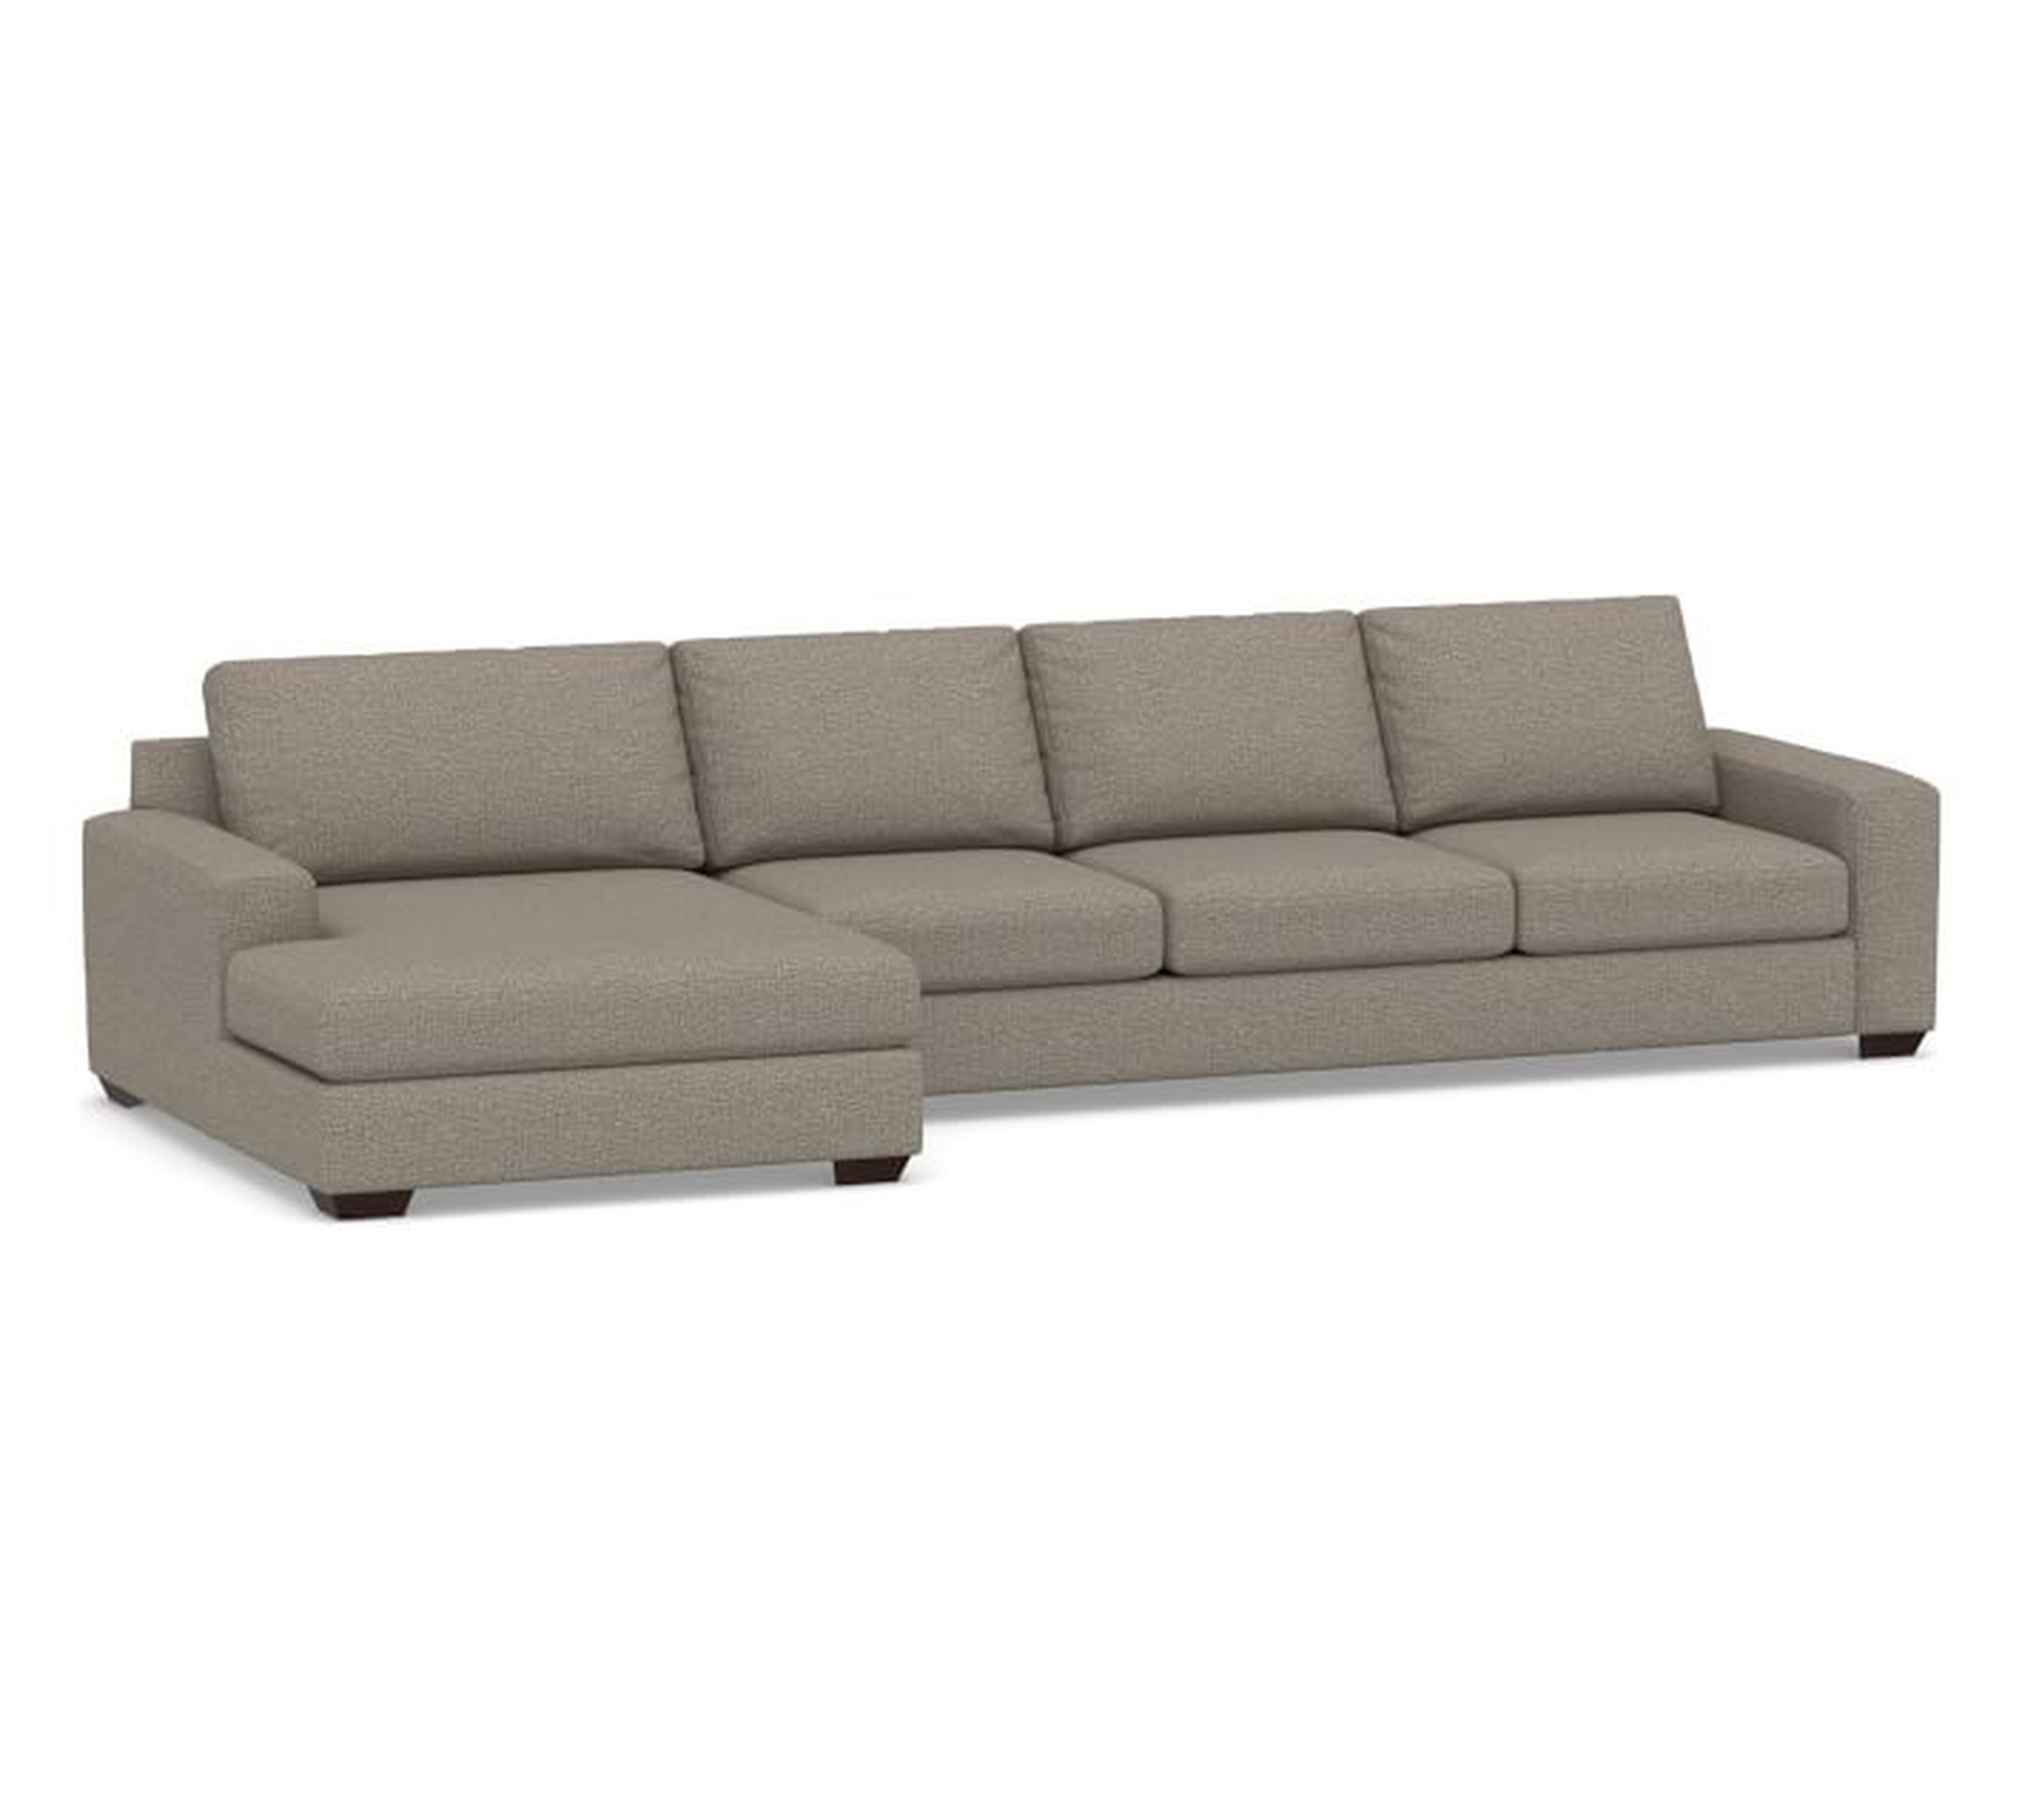 Big Sur Square Arm Upholstered Right Arm Sofa with Left Arm Double Wide Multi-Seat Chaise Sectional - 156" width - Pottery Barn